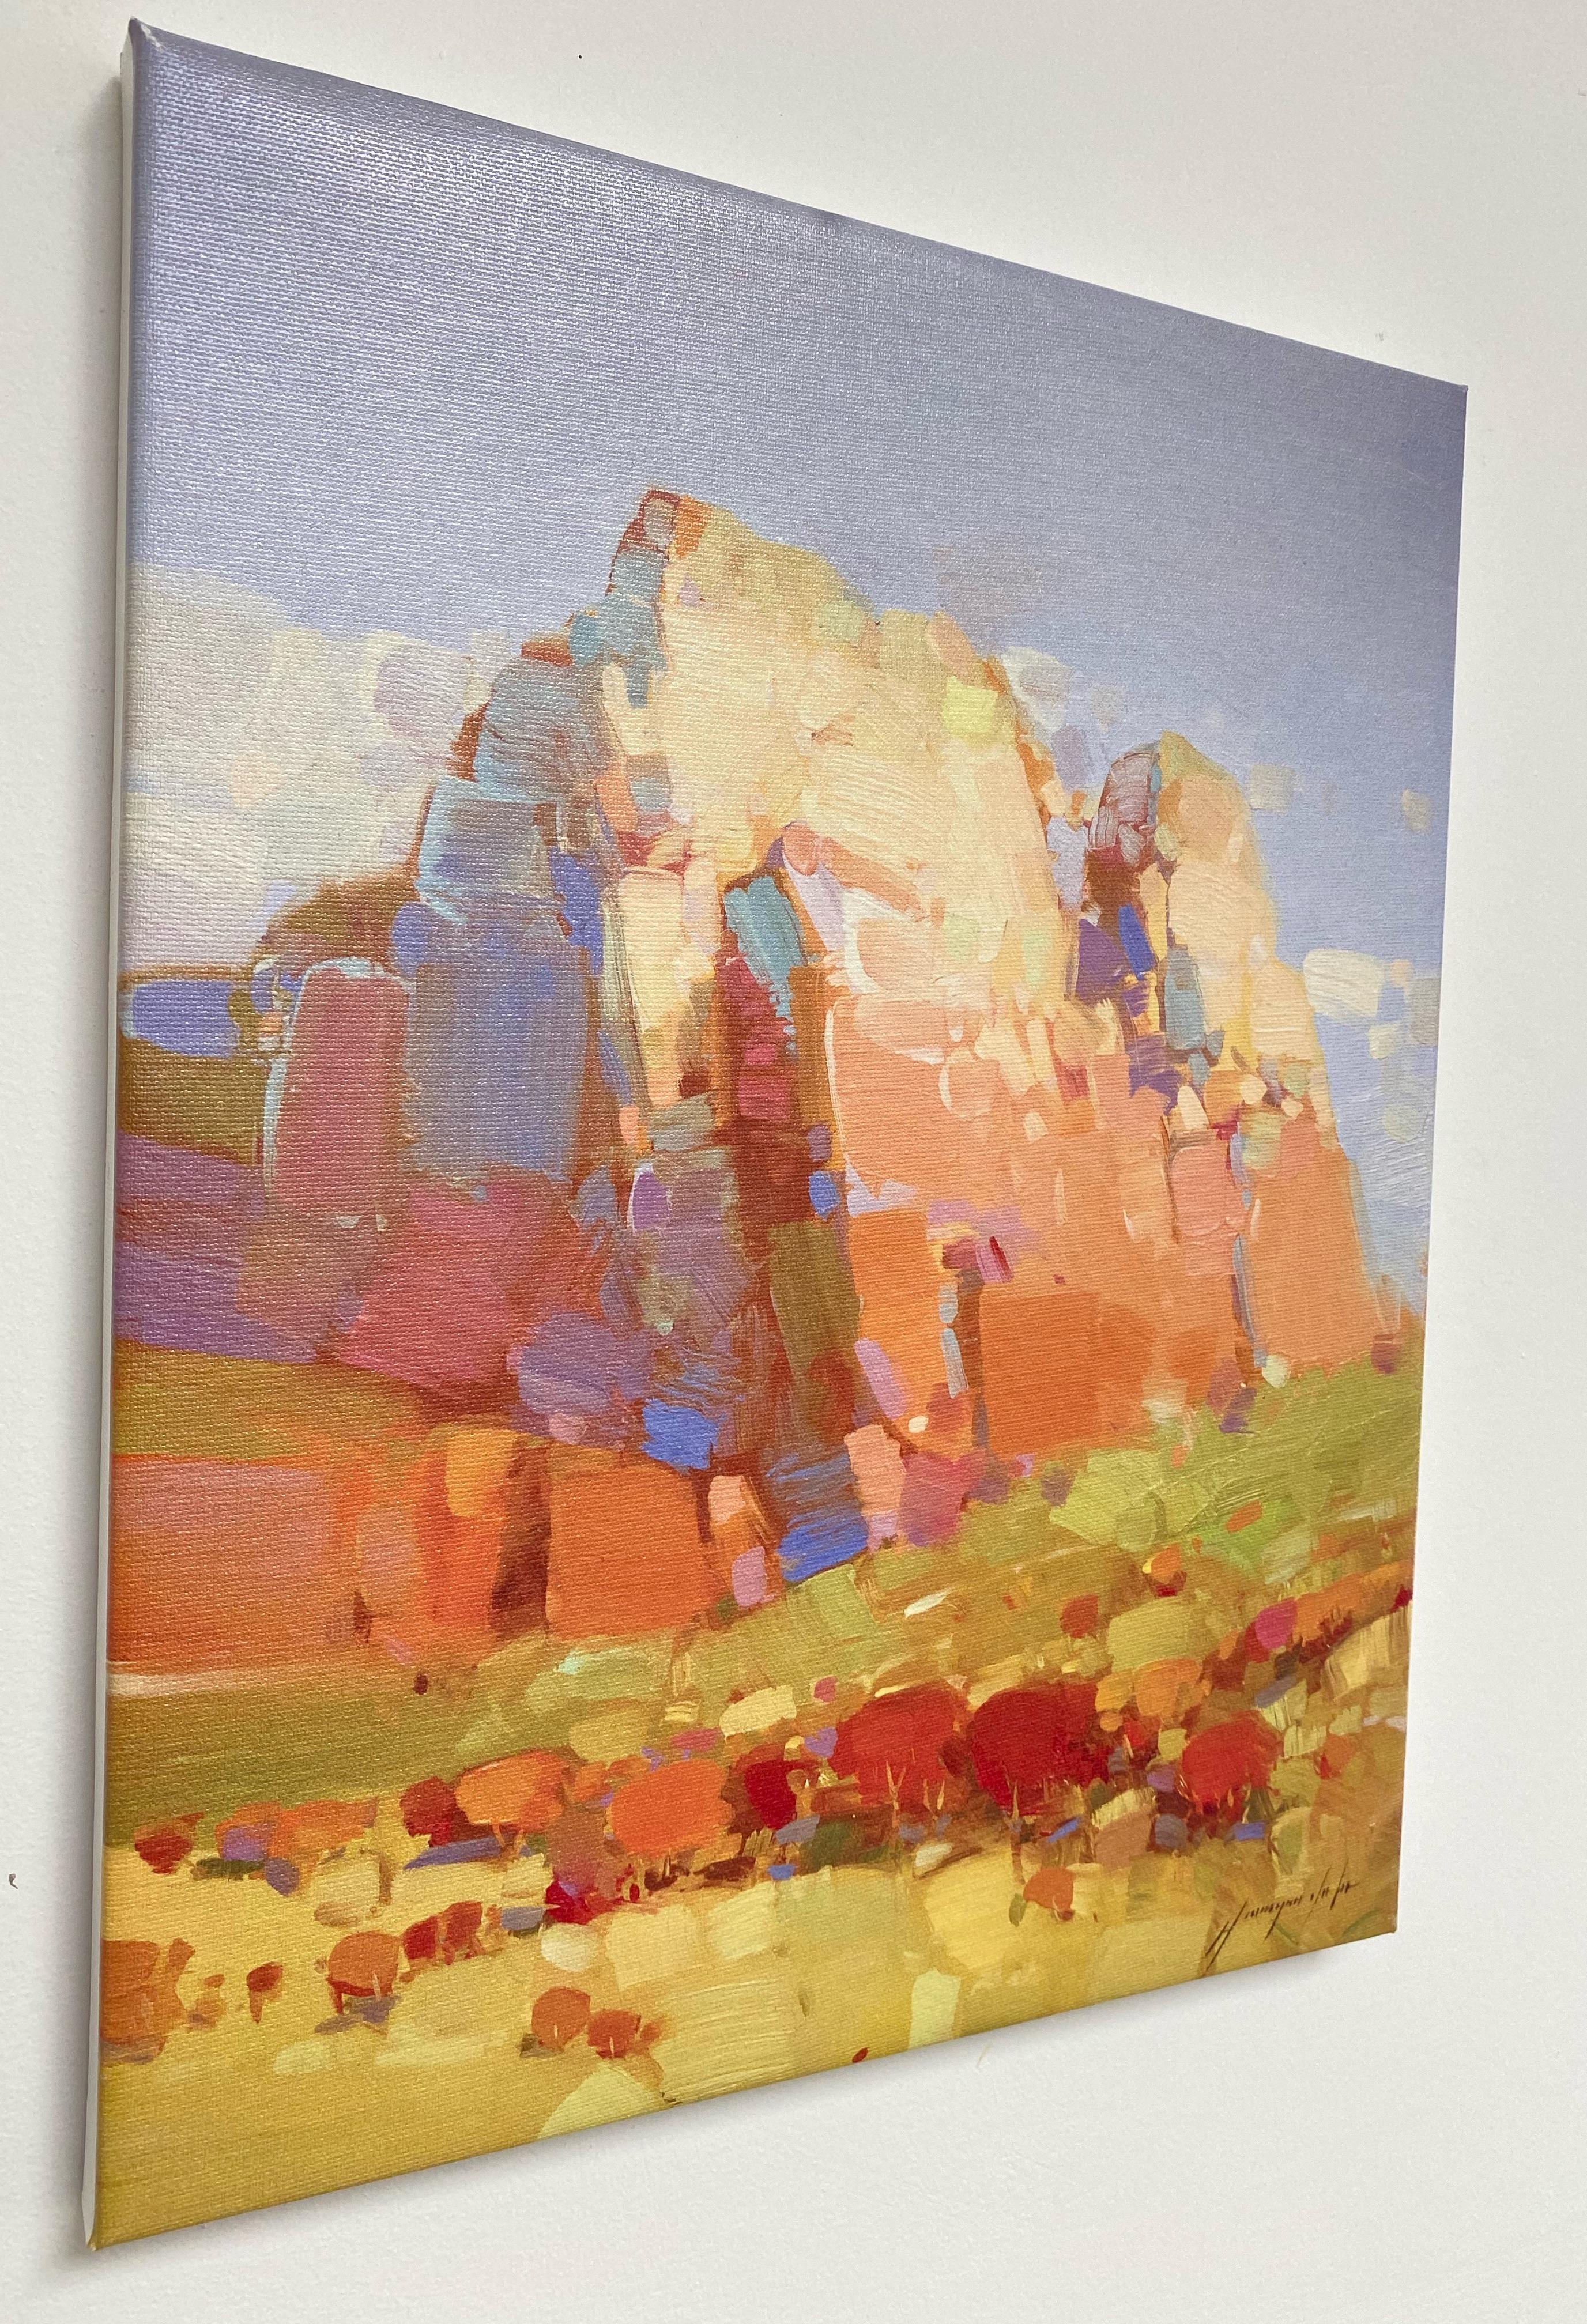 Cliff Mountain, Print on Canvas - Brown Landscape Painting by Vahe Yeremyan